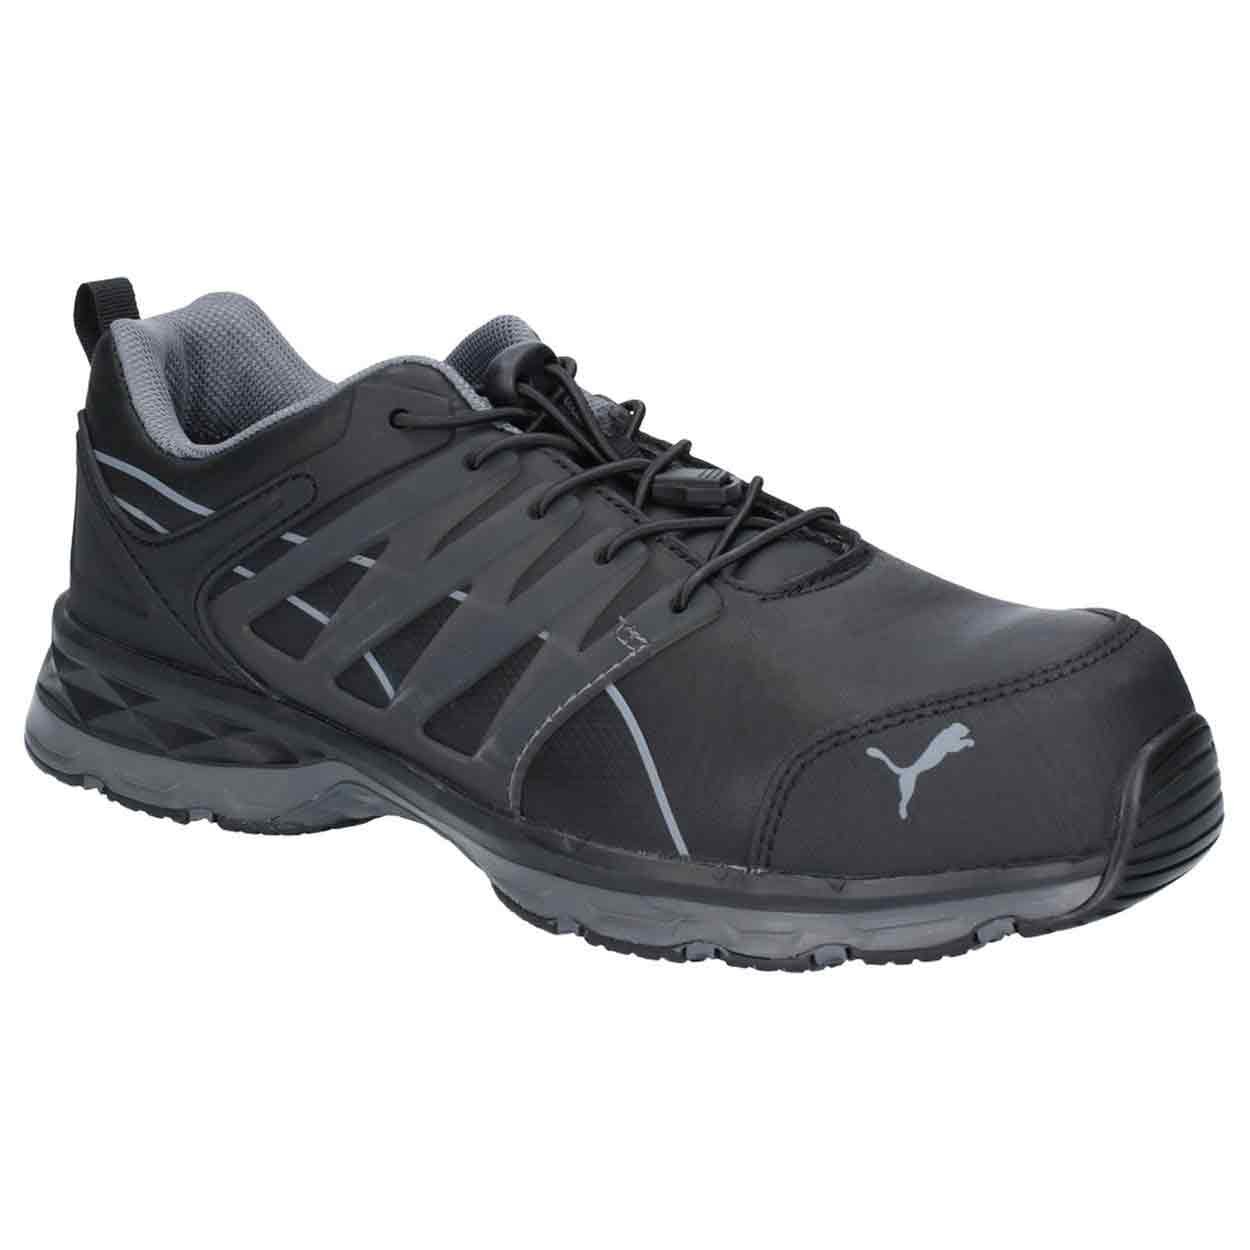 Puma Safety Velocity 2.0 Safety Shoe - Safety Shoes and Trainers - Mens Safety  Boots & Shoes - Safety Footwear - Best Workwear